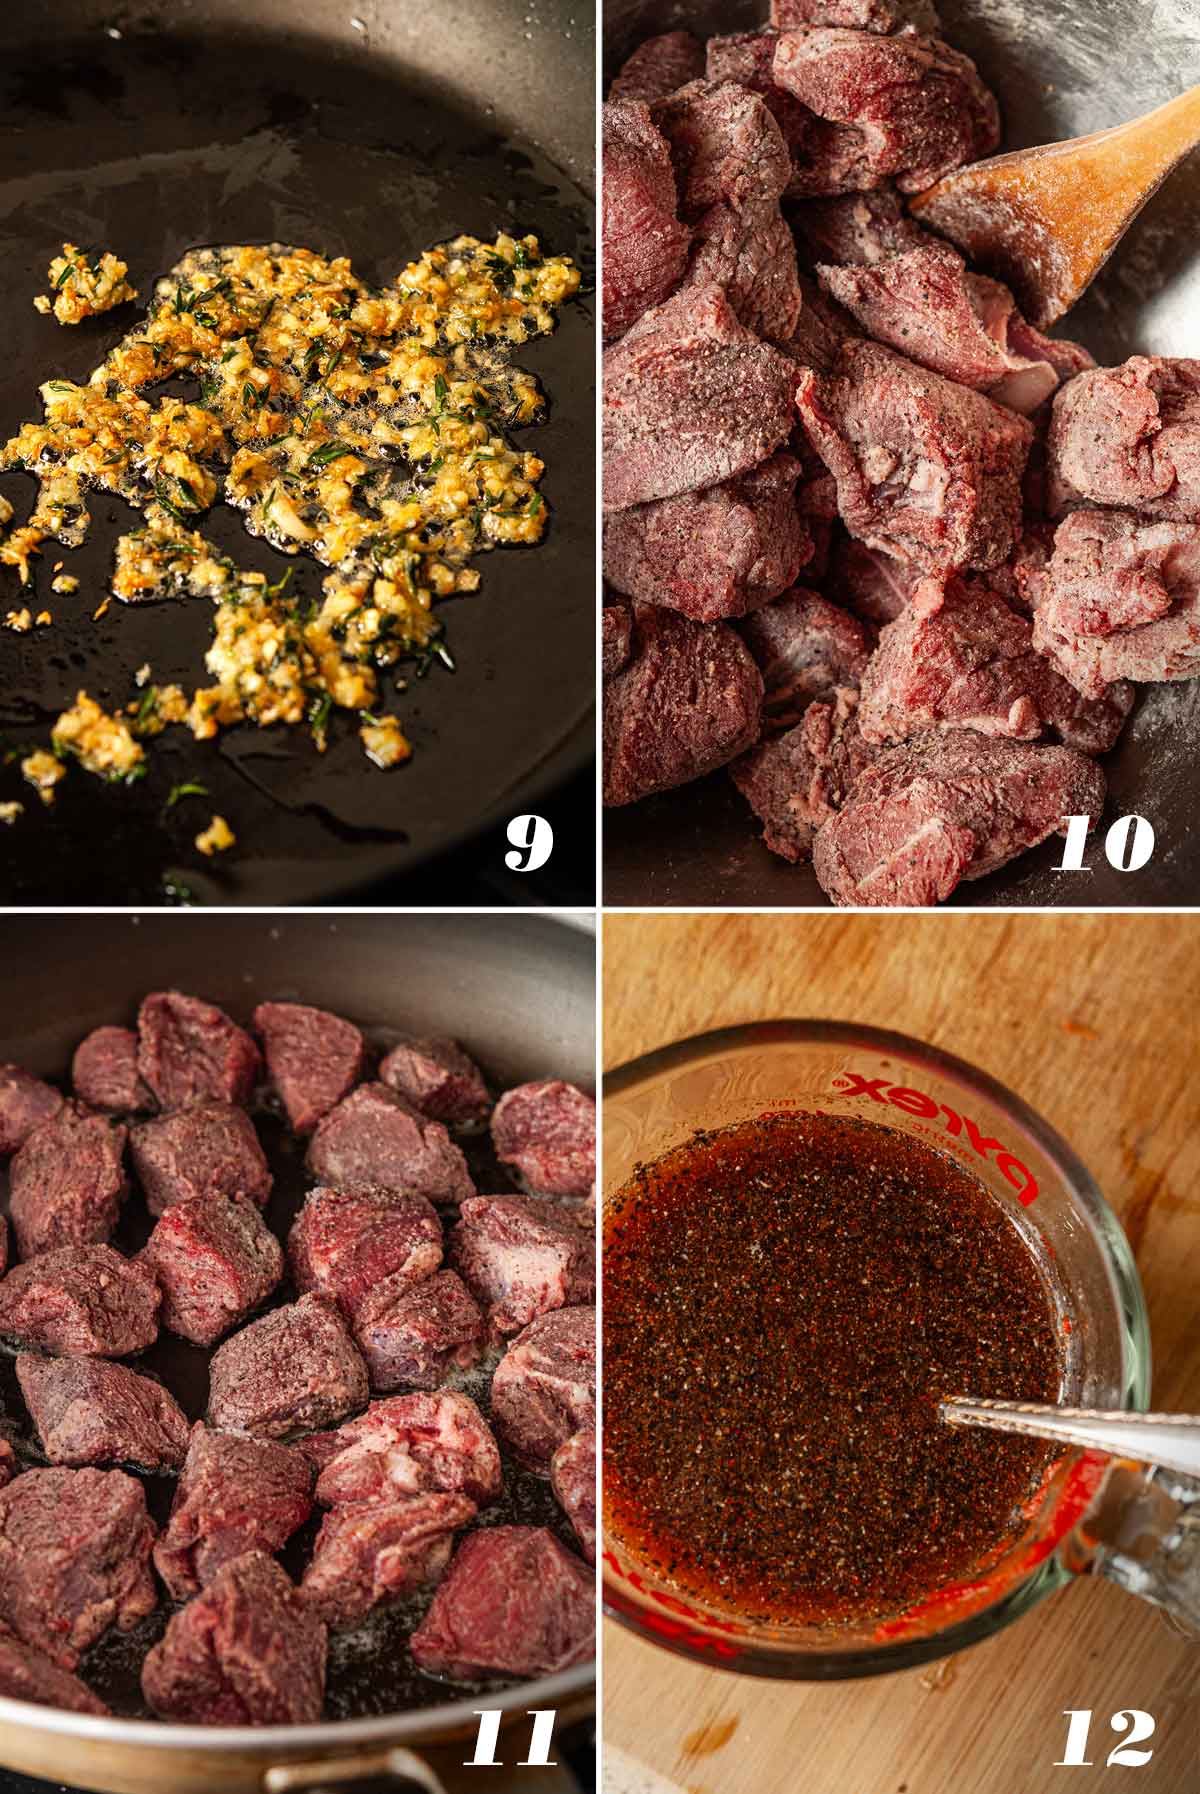 A collage of 4 numbered images showing how to cook ingredients.